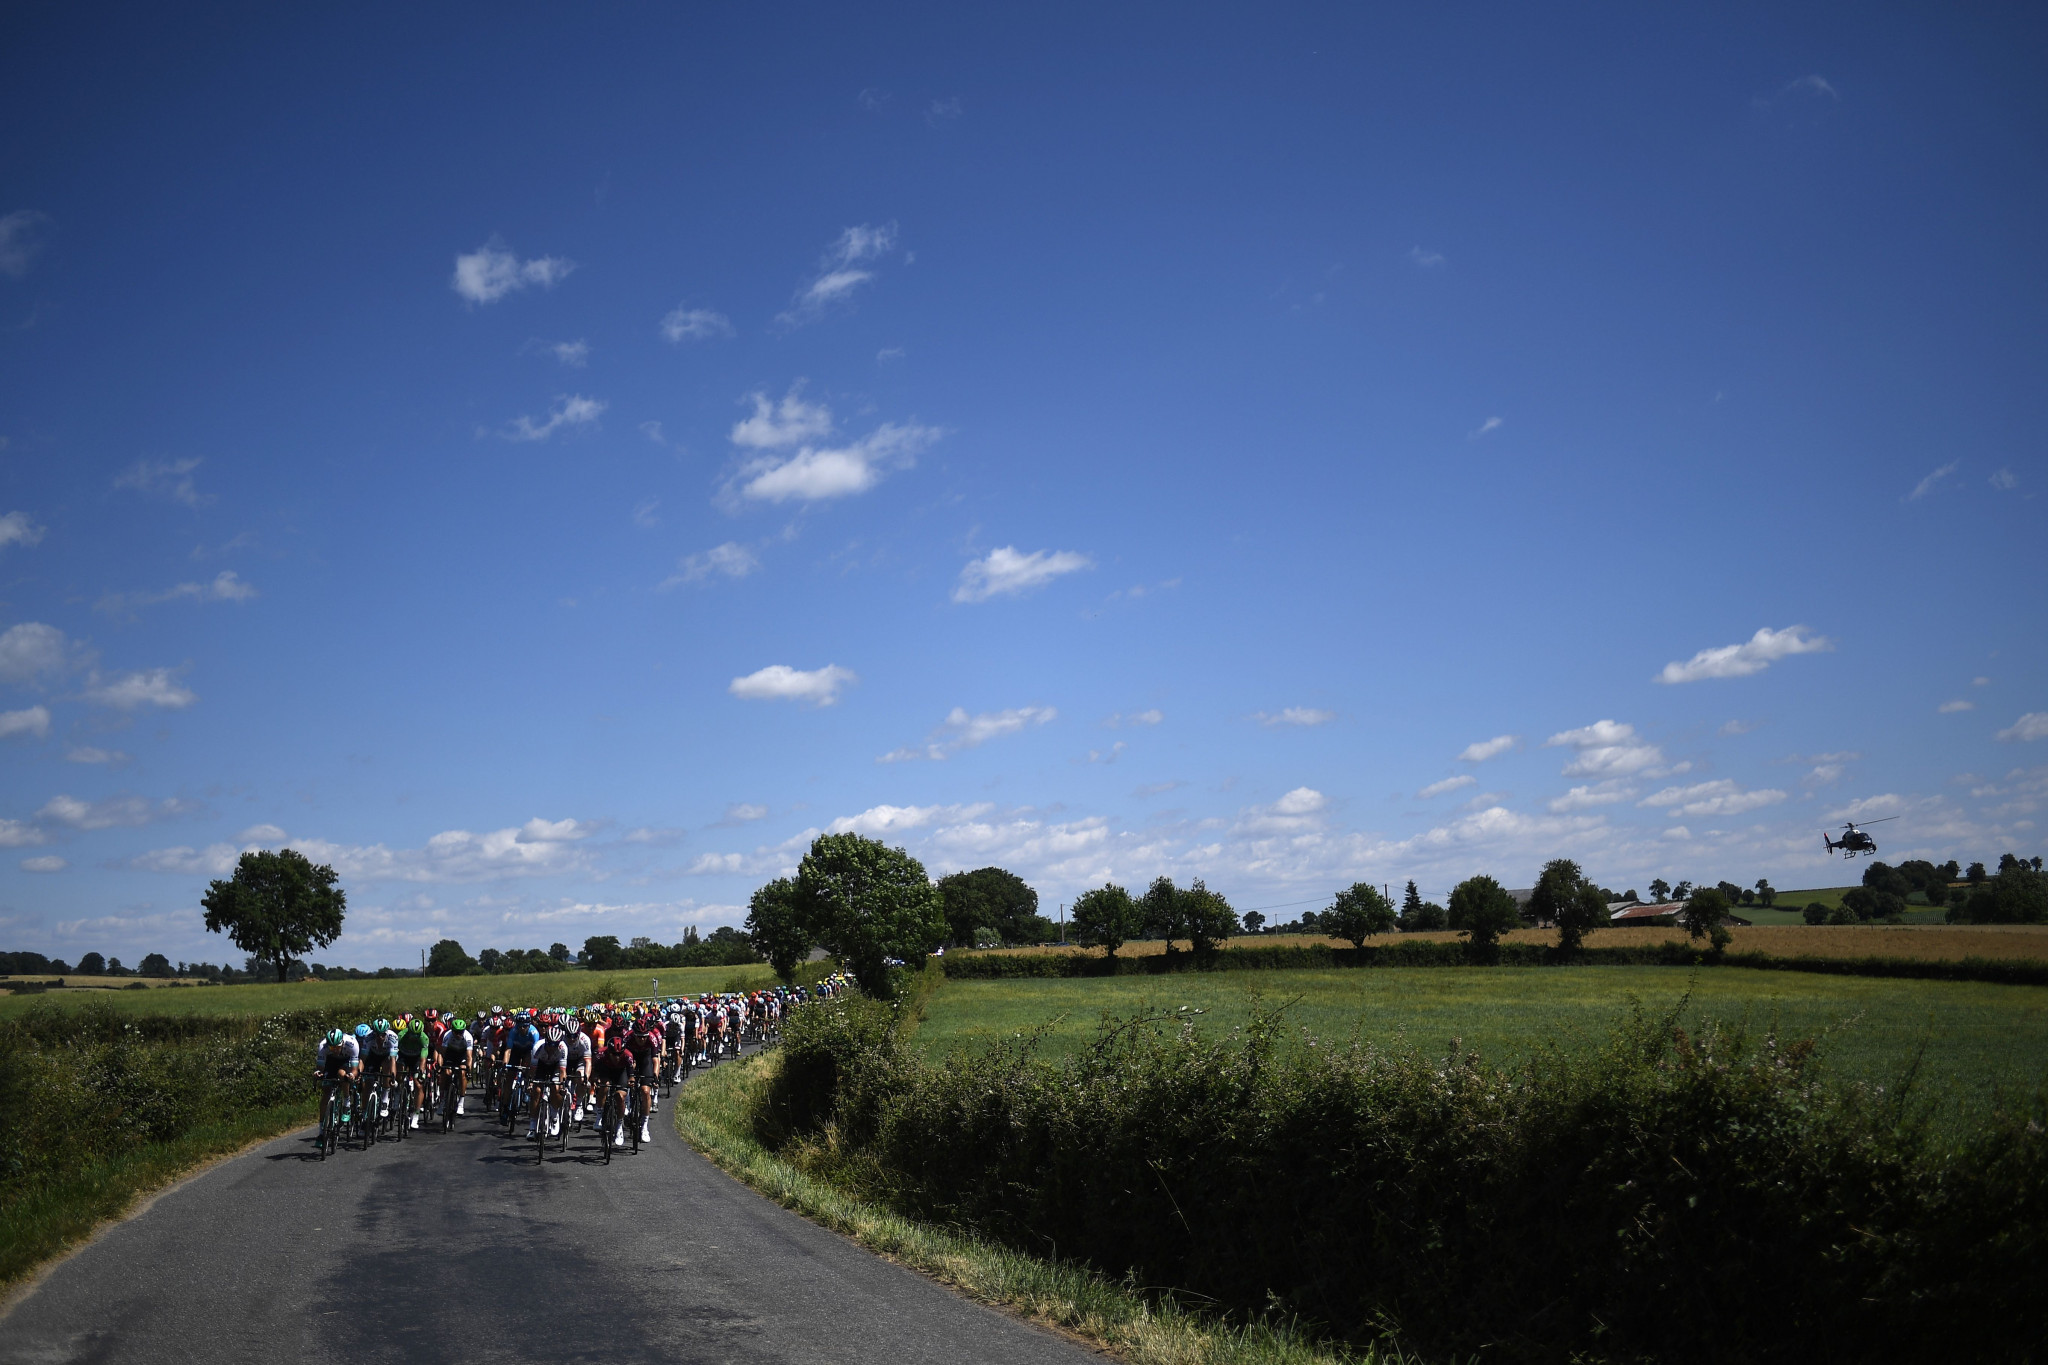 Tour de France organisers set May deadline to determine whether race can be held